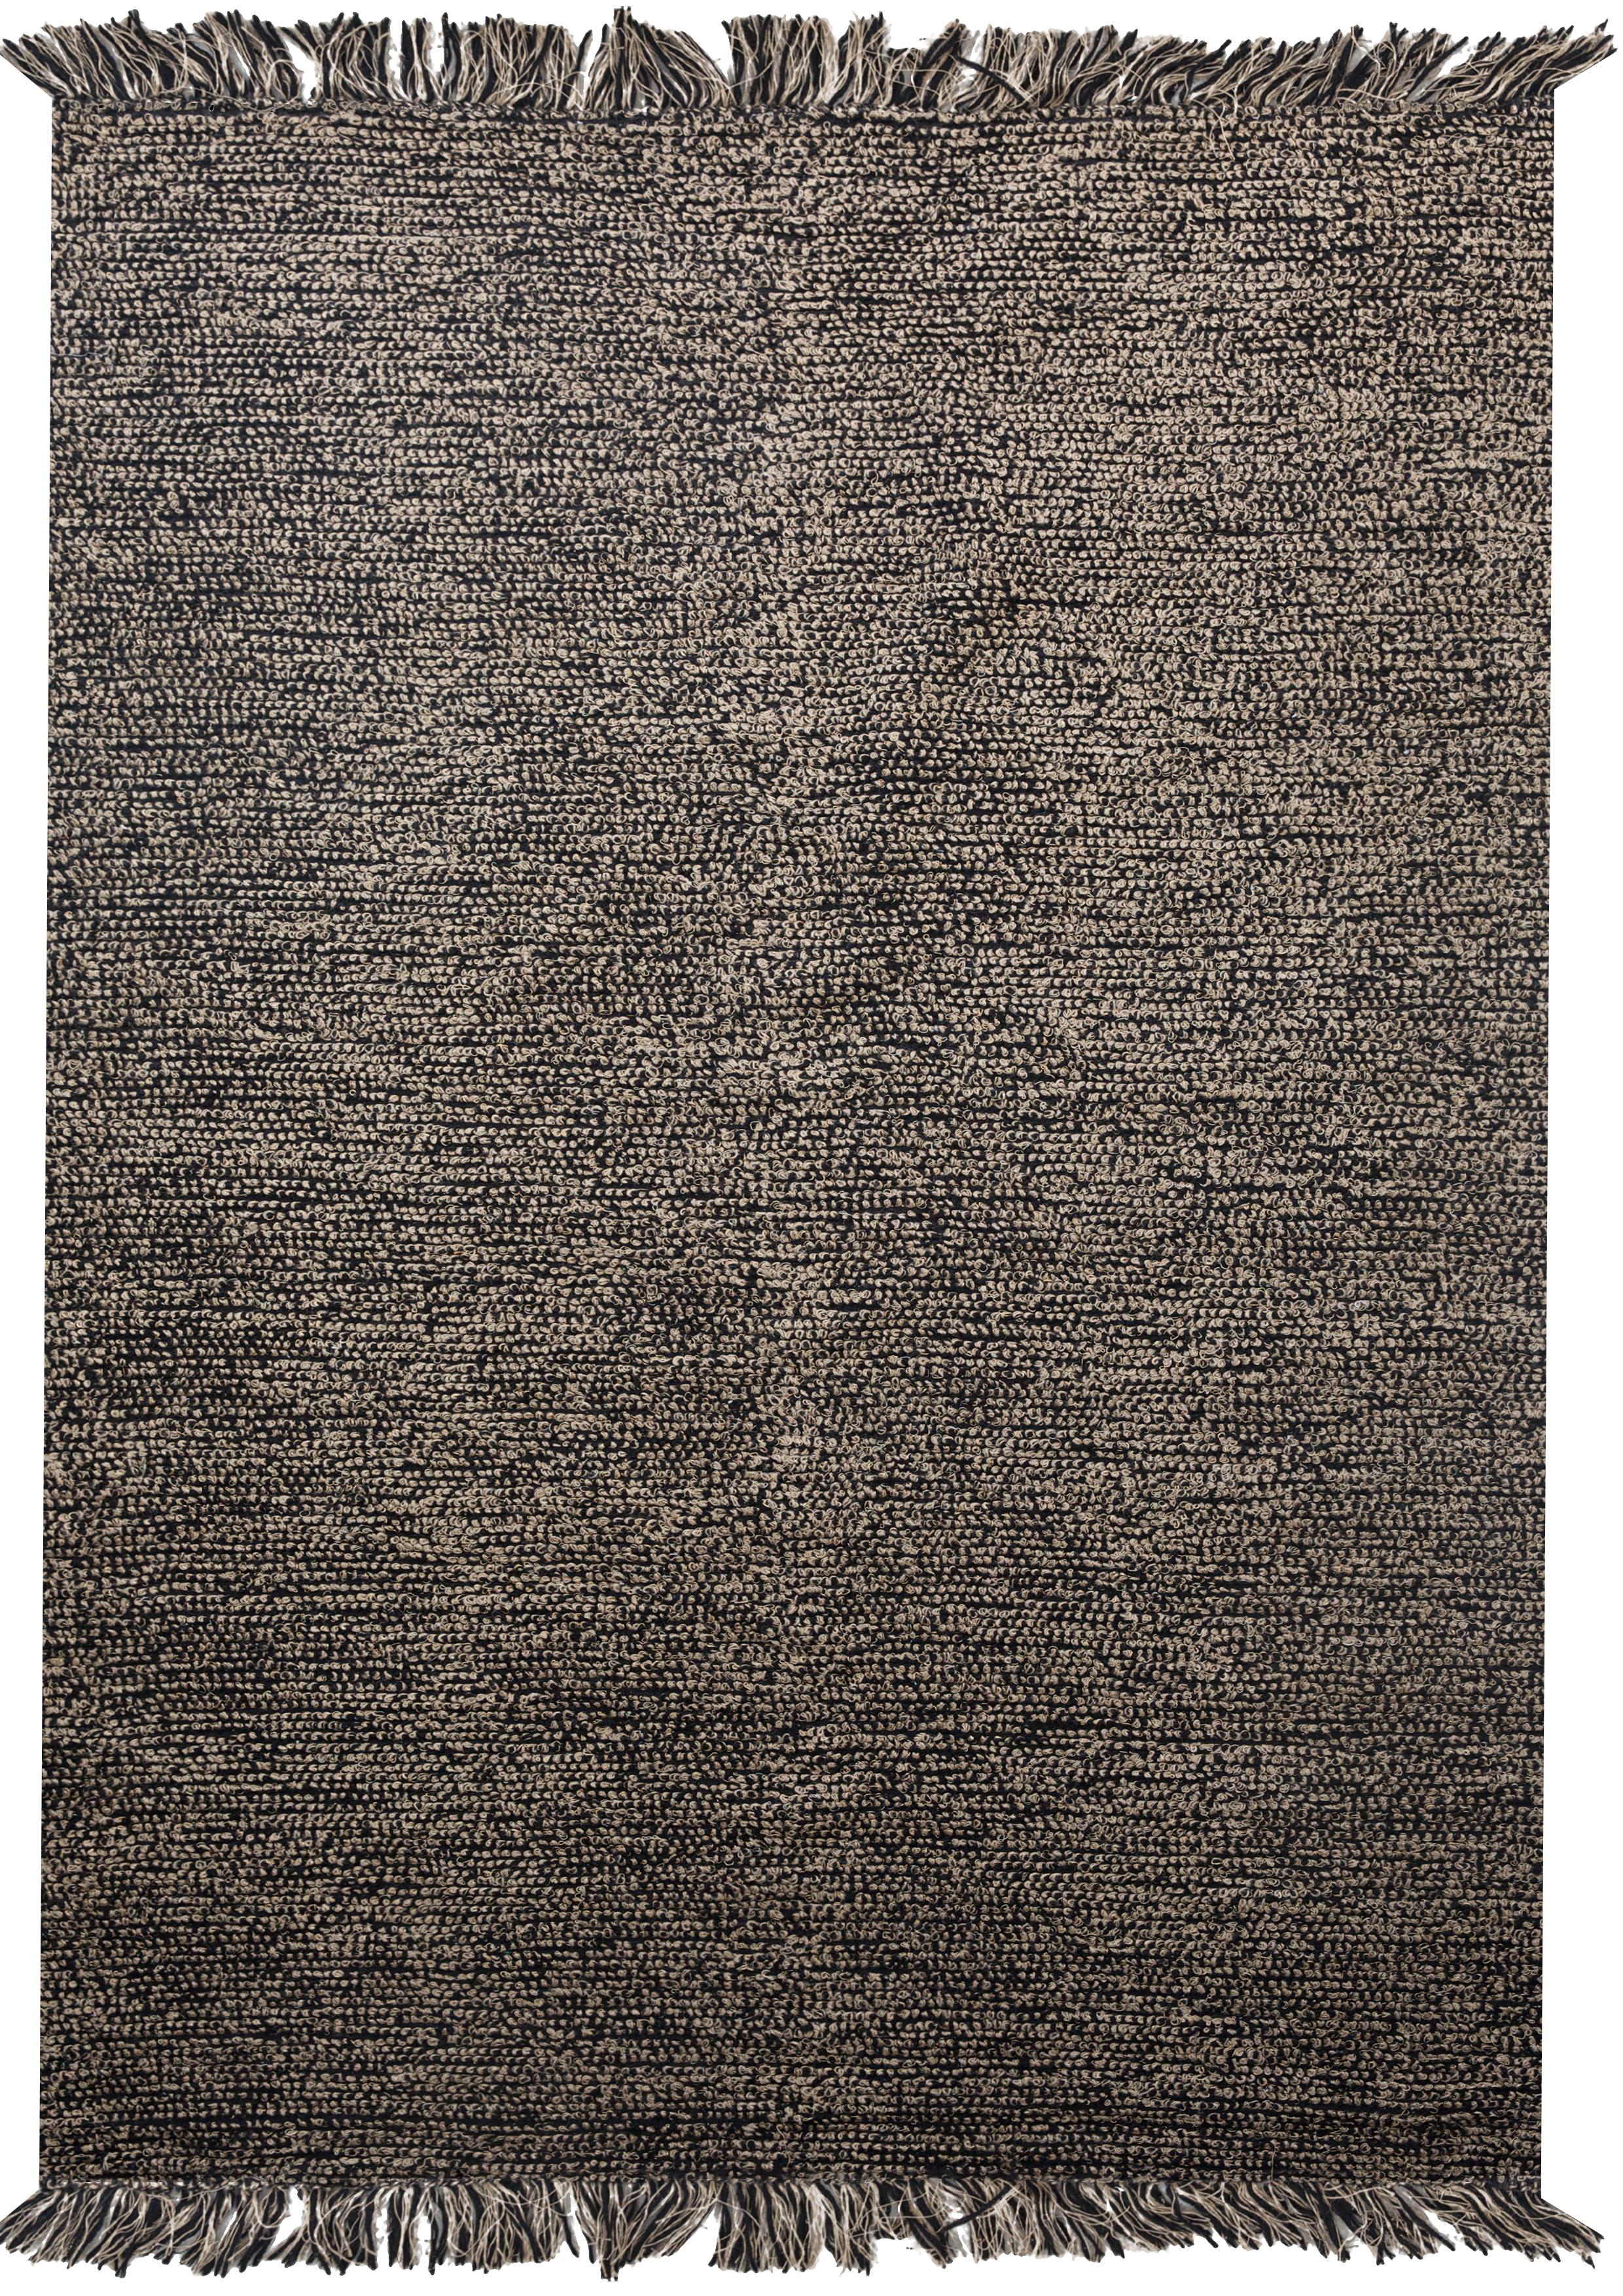 Hand-Woven Natural Rock Patterns Customizable Mars Weave Rug in Black Small For Sale